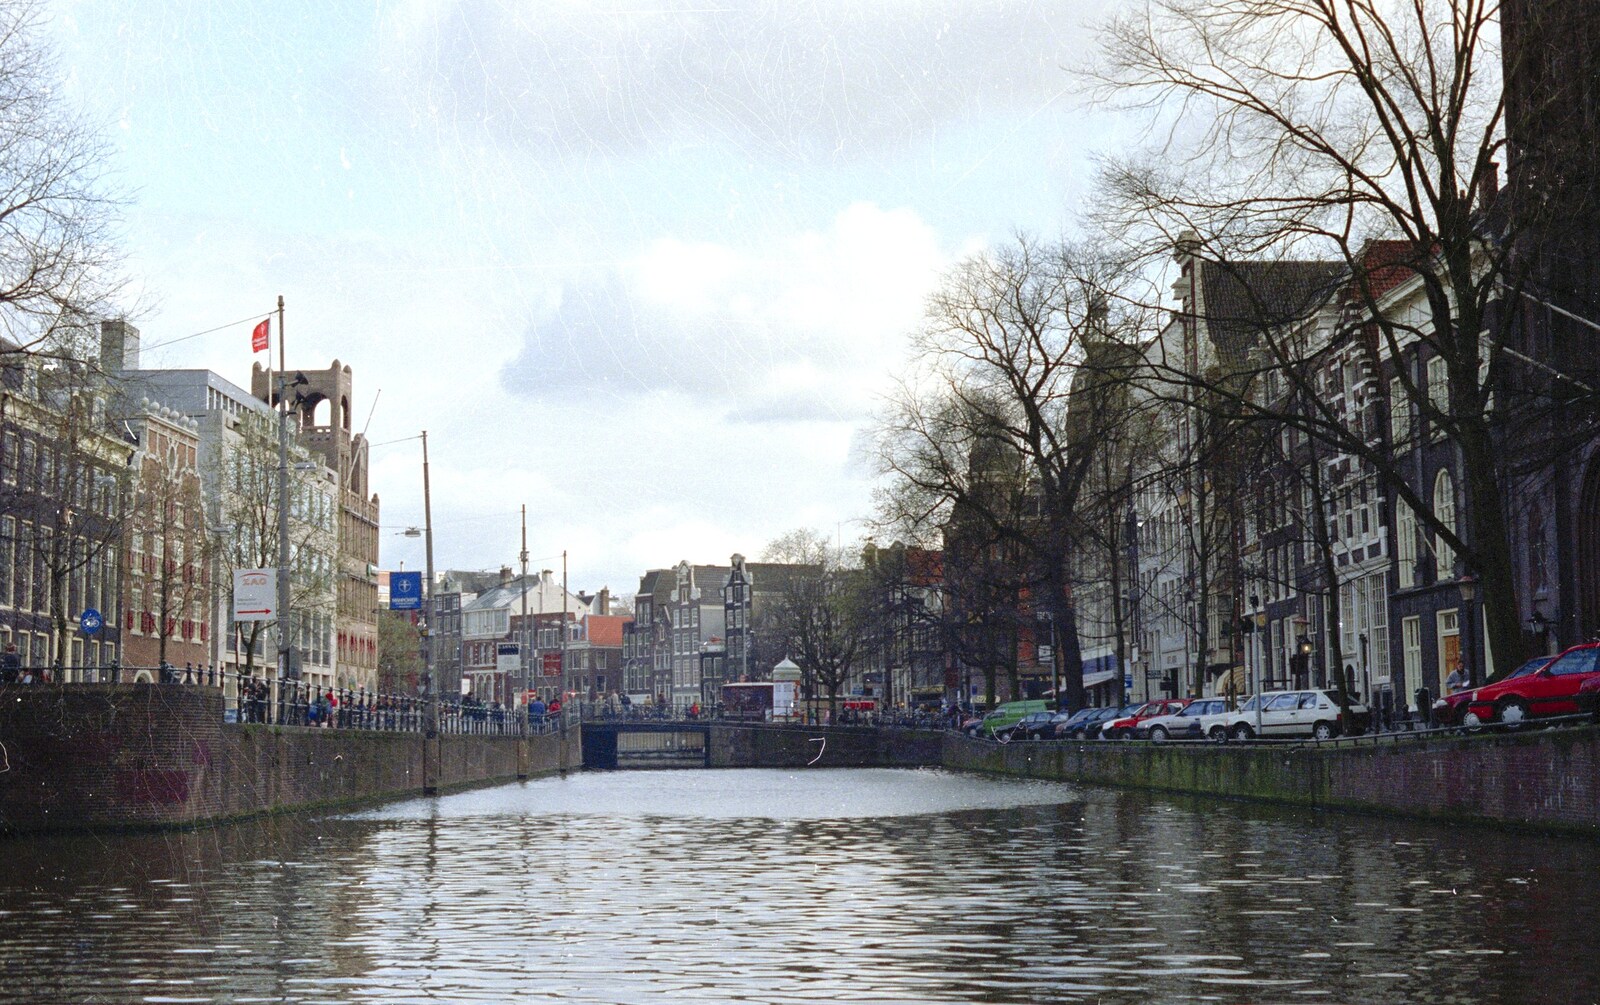 Out and About in Amsterdam, Hoorne, Vollendam and Edam, The Netherlands - 26th March 1992: The River Amstel